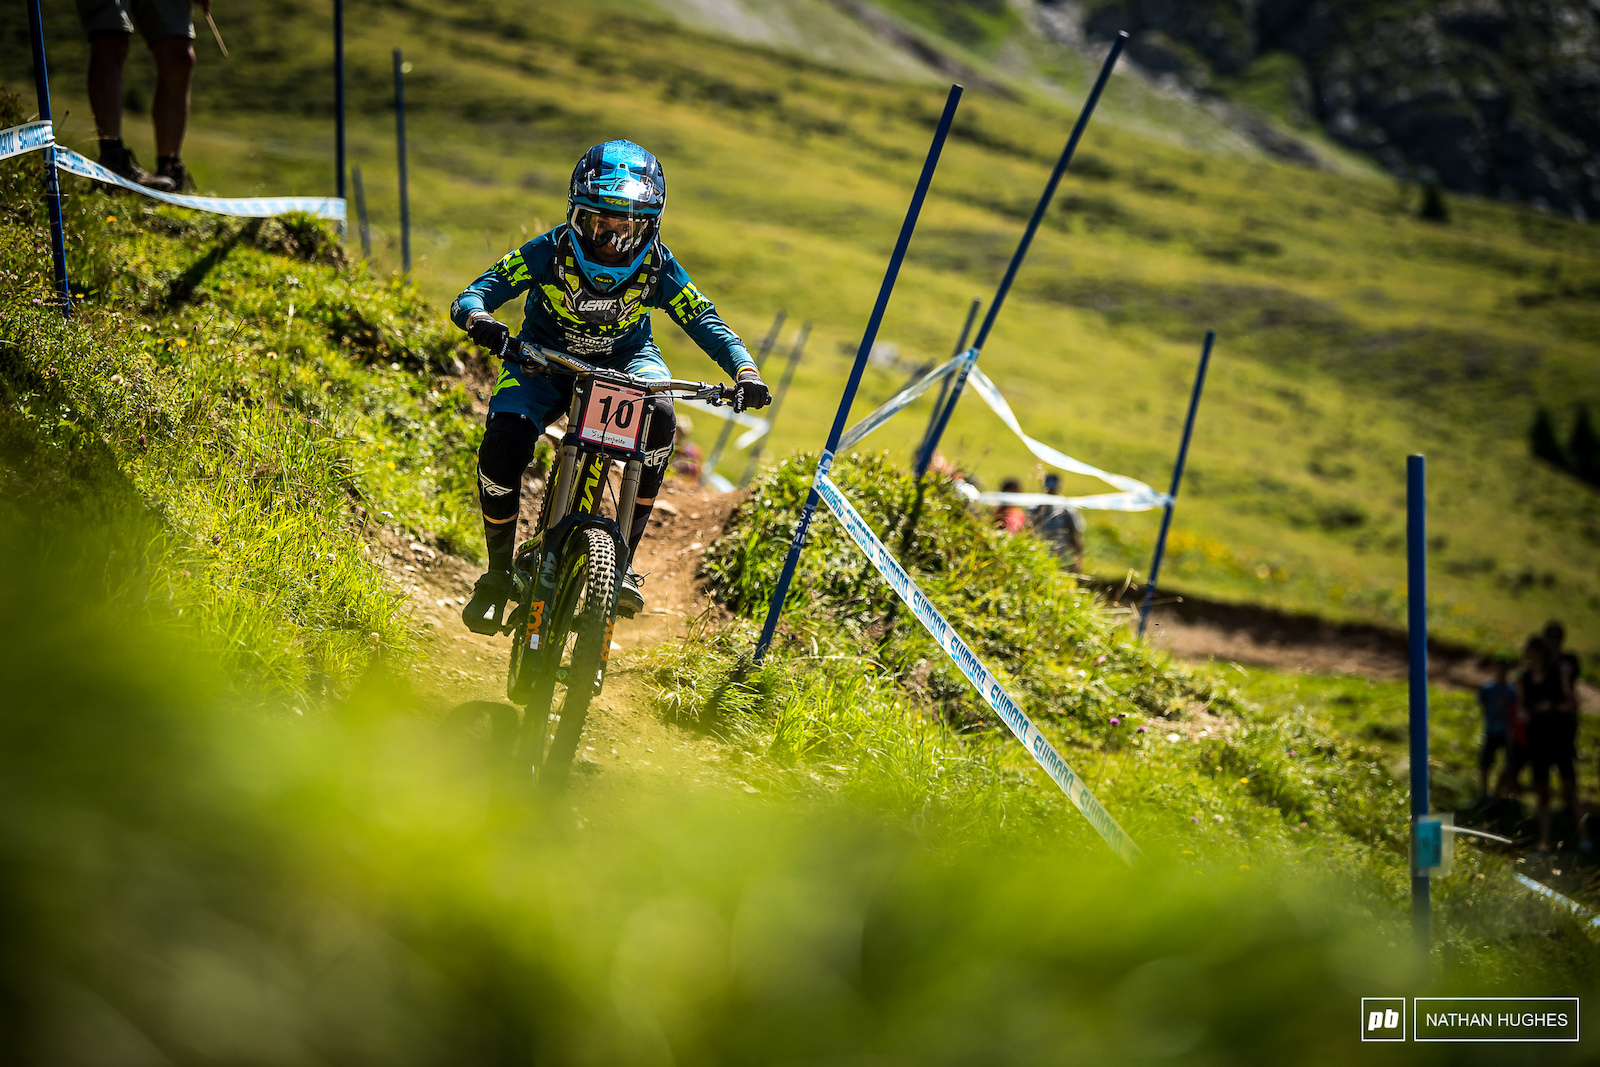 Emilie Siegnthaler was the top Swiss rider, landing in a podium position for the qualies.